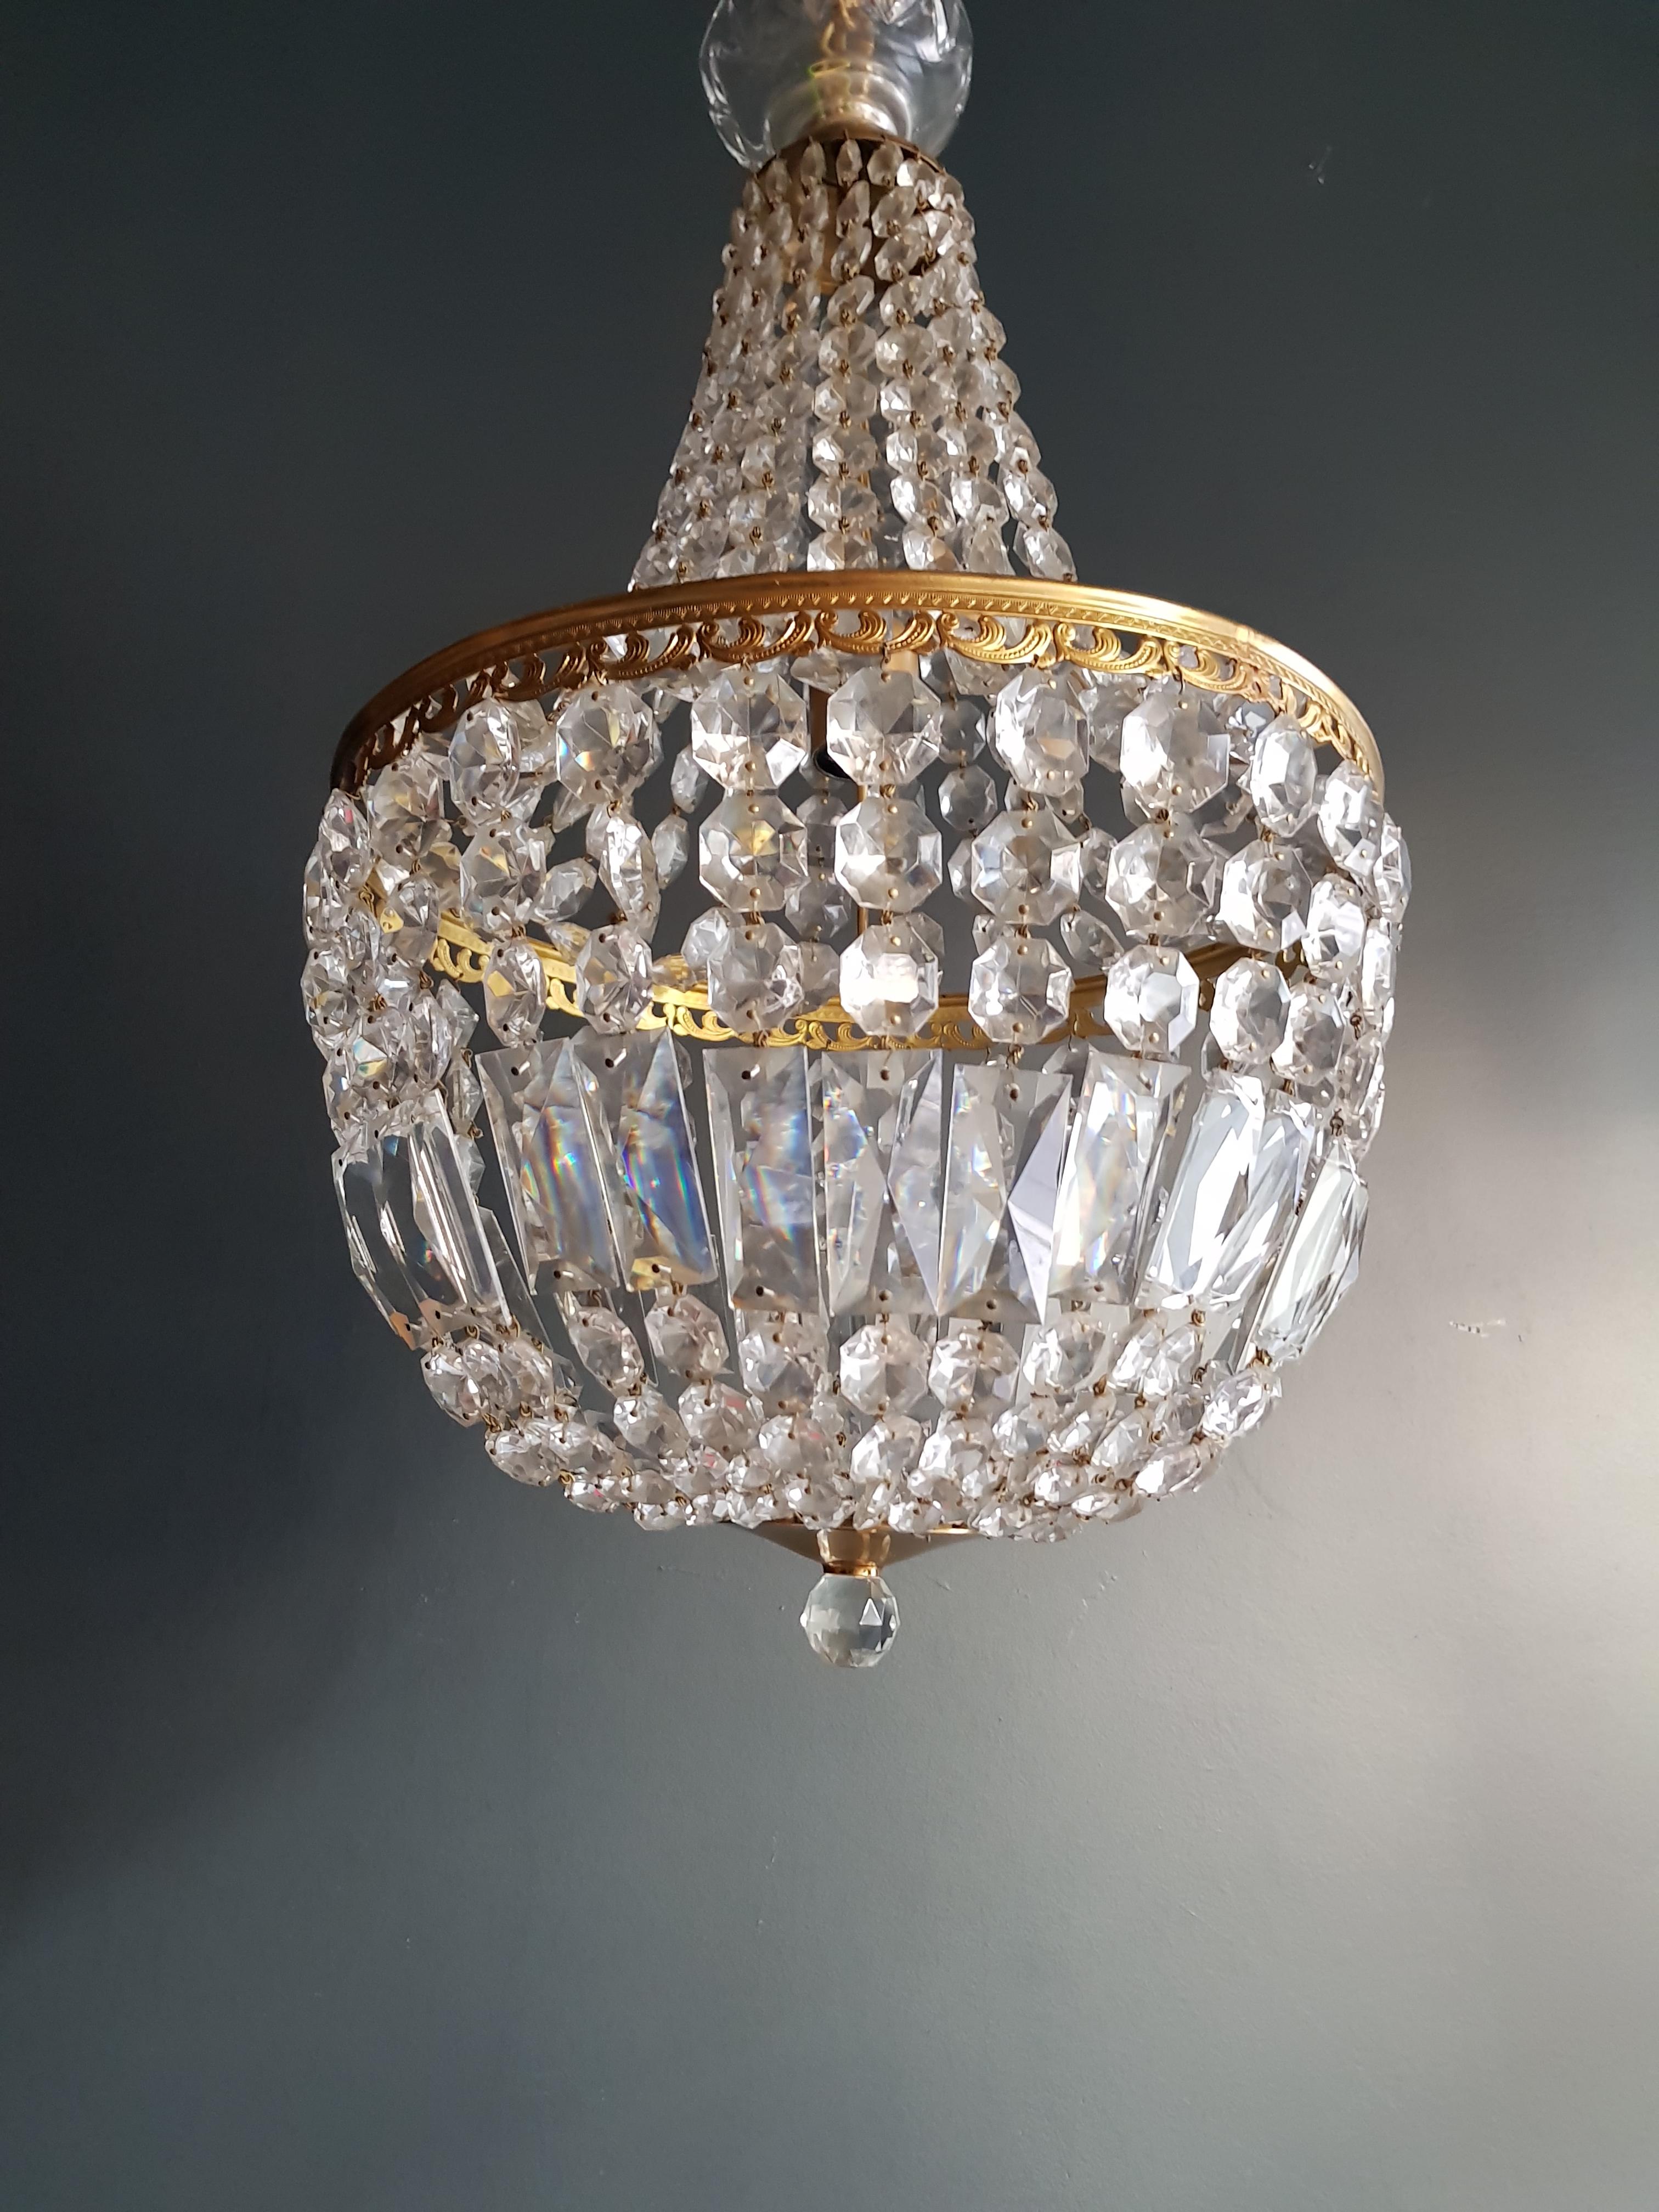 Original preserved chandelier, circa 1950. Cabling and sockets completely renewed. Crystal hand-knotted
Measures: Total height: 130 cm, height without chain: 60 cm, diameter 35 cm, weight (approximately) 4kg.

Number of lights: One-light bulb